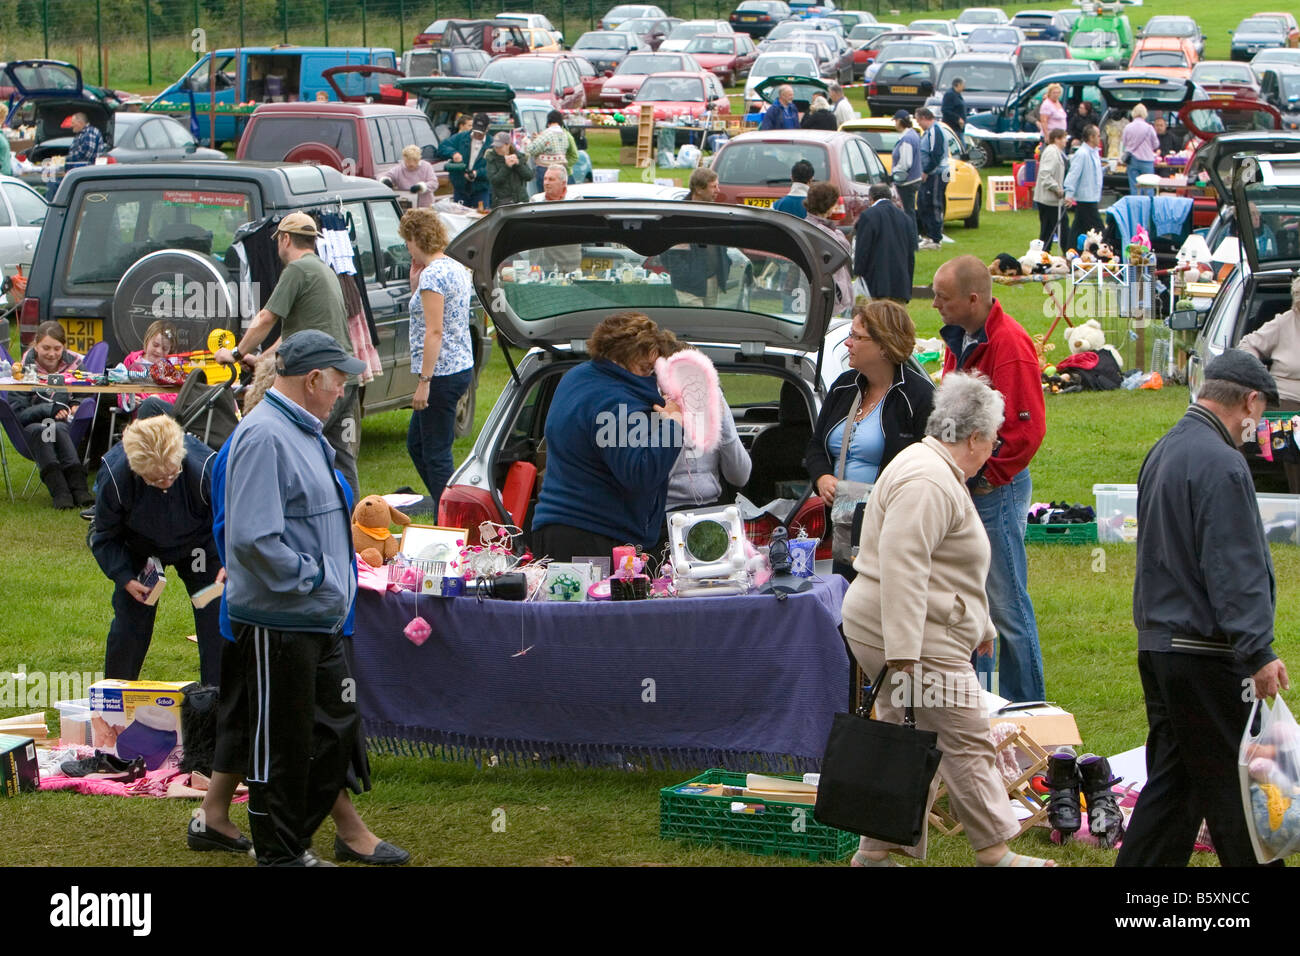 People buy and sell household items at a car boot sale in the market town of Banbury Oxfordshire England Stock Photo